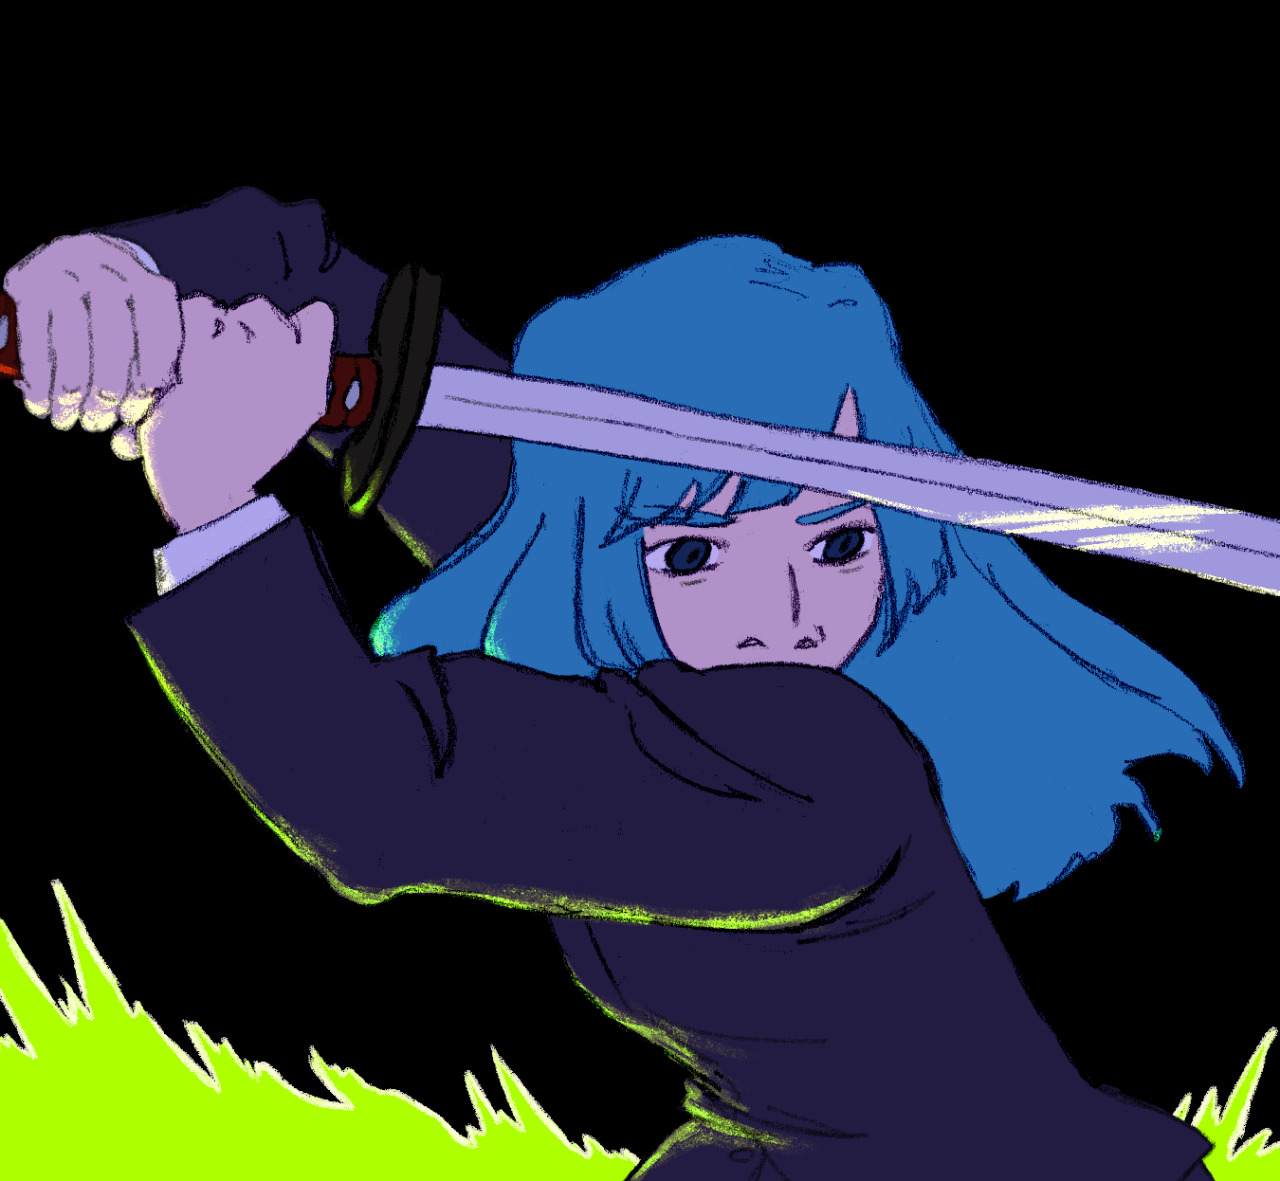 hold your stance[ID: portait of kasumi miwa from jujutsu kaisen on a black background. she holds a katana level with her forehead, parallel to the ground. her expression is serious, mouth hidden by her raised shoulder. bright green energy flares from below her.] #kasumi miwa#miwa kasumi#jjk#jujutsu kaisen#drawin#fanart #miwa :)))) shes so fun